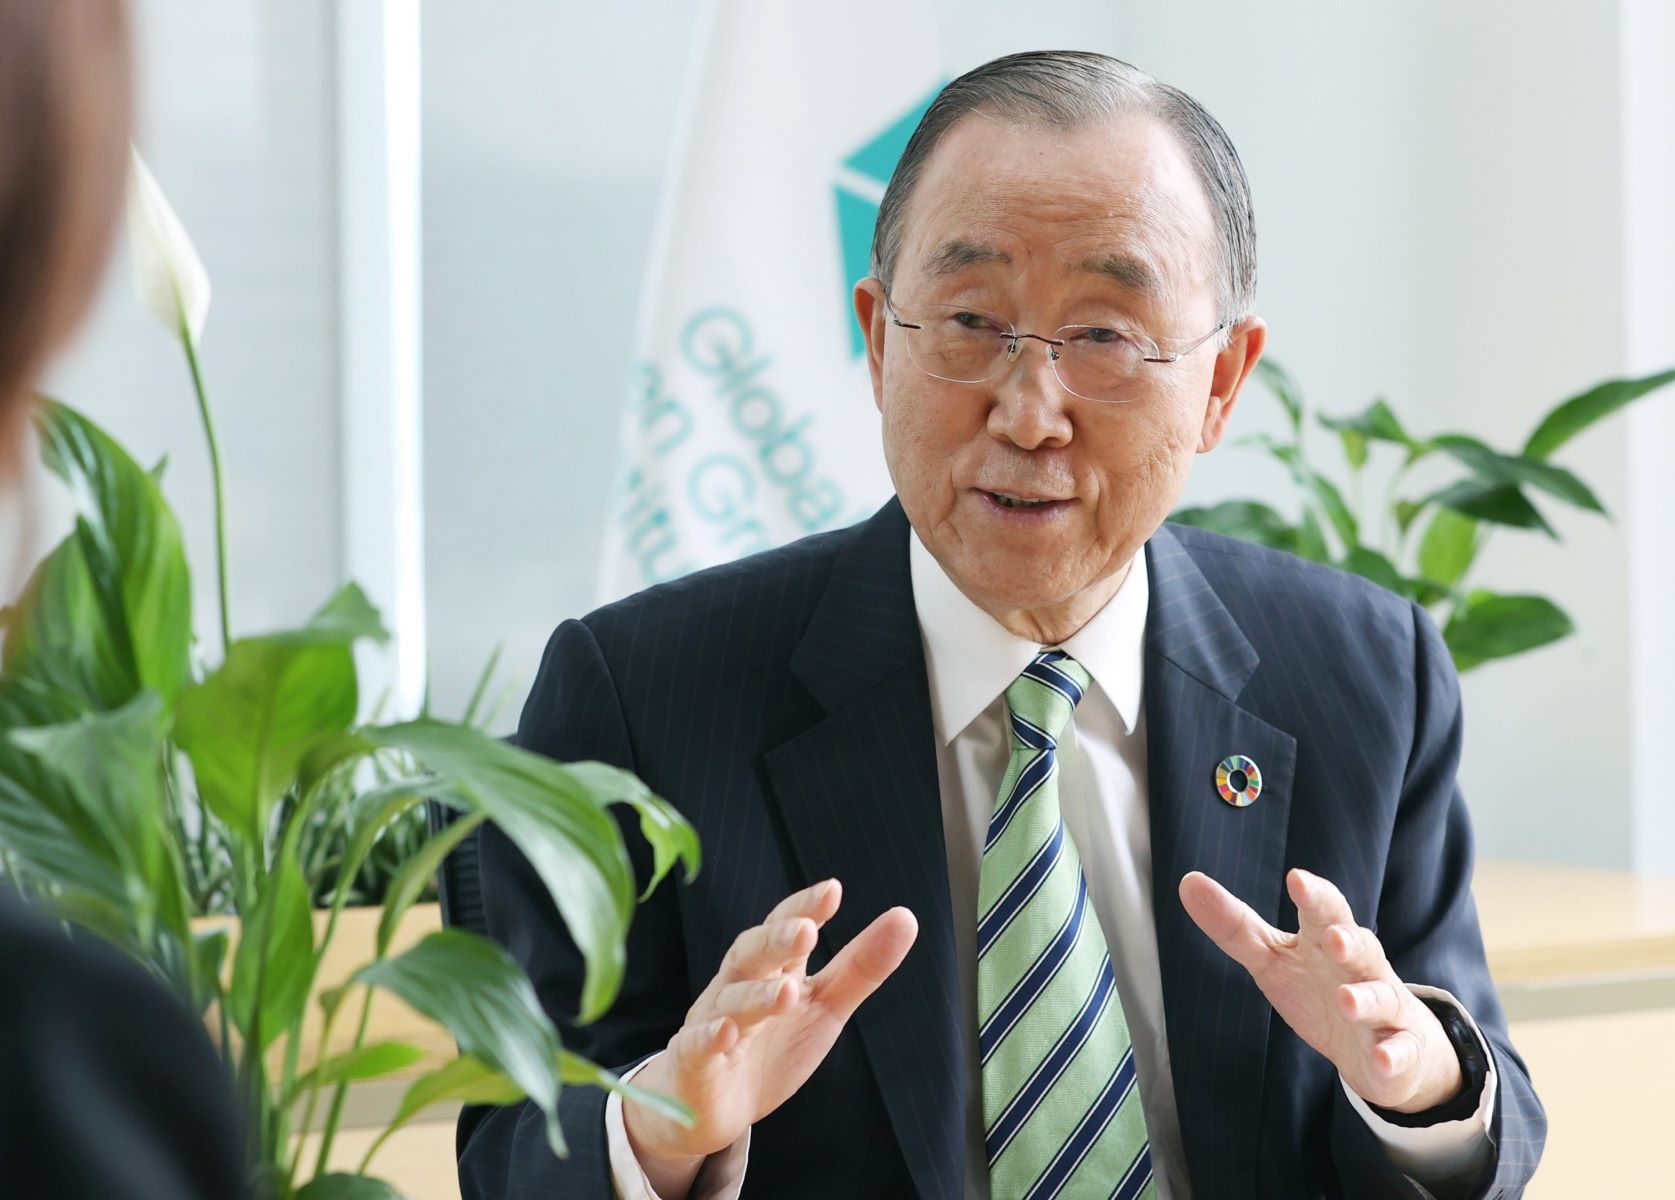 15-enigmatic-facts-about-ban-ki-moon